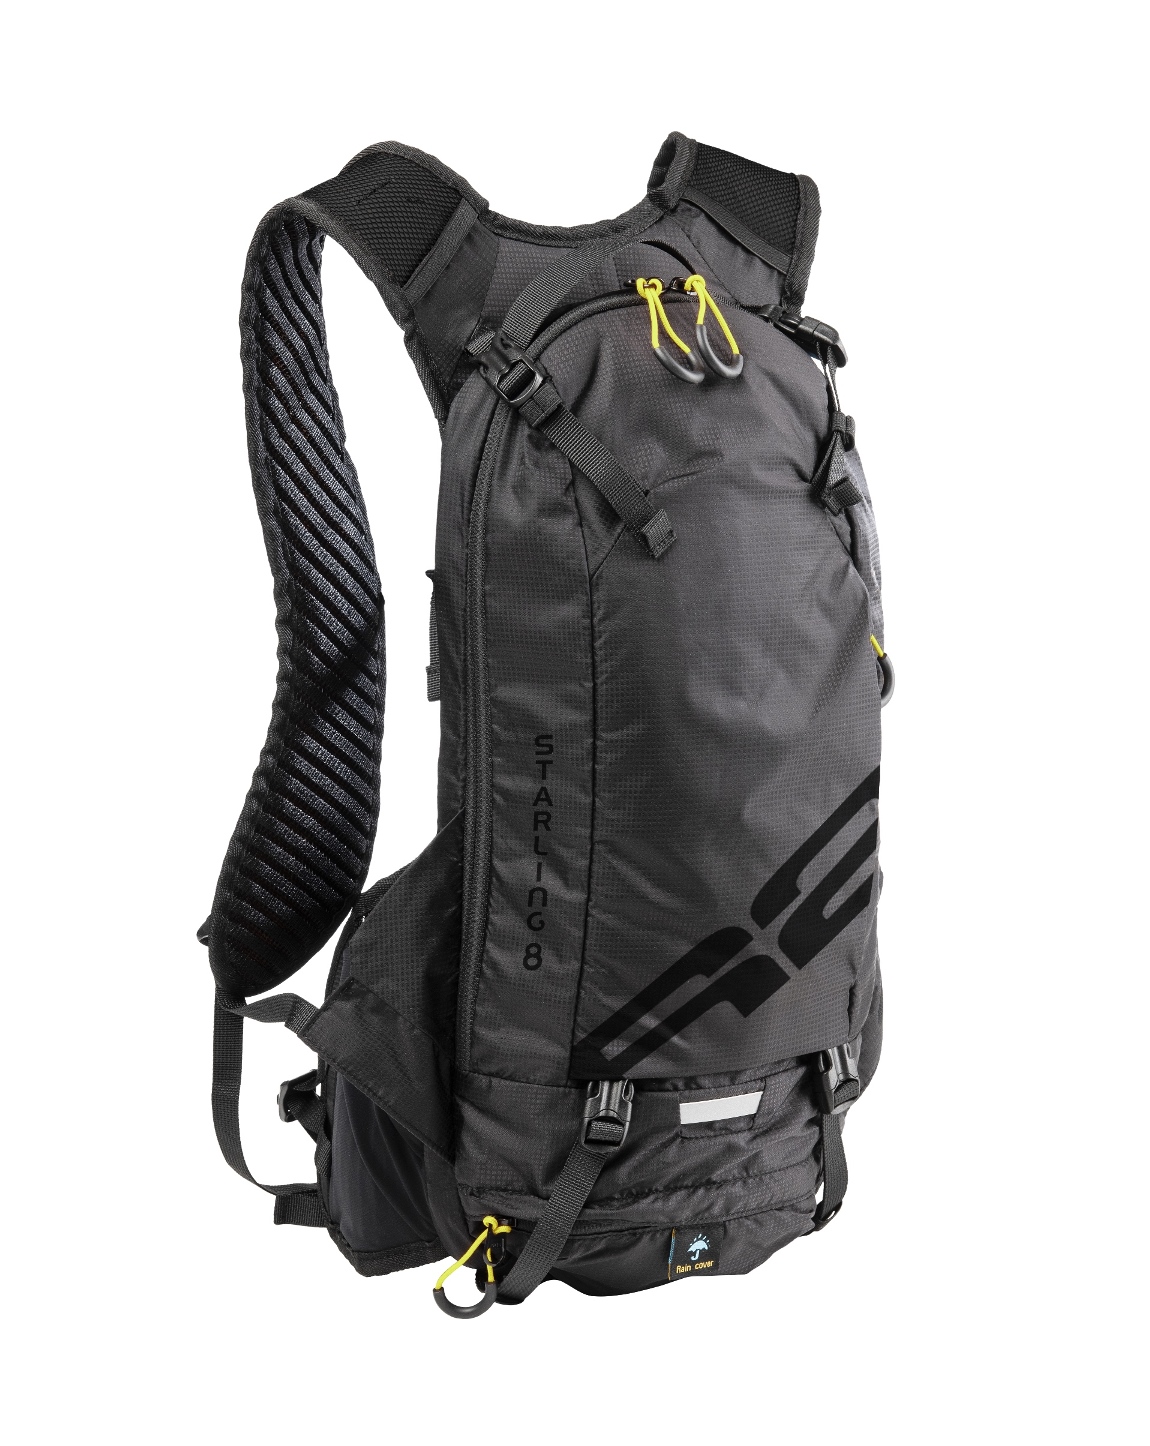 Sport backpack  R2 STARLING ATBP03A